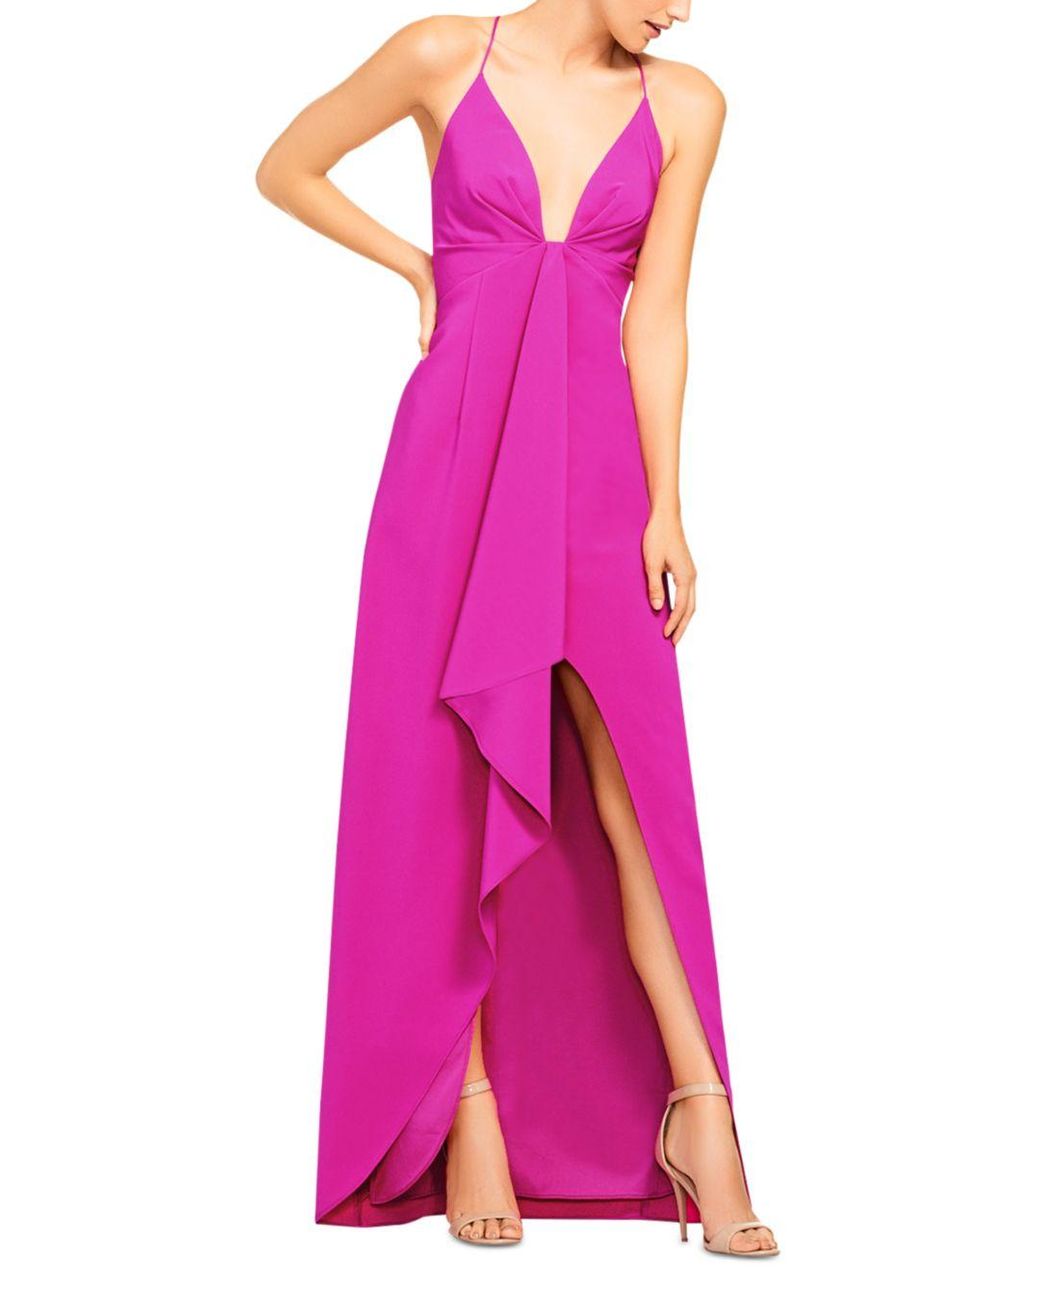 Aidan By Aidan Mattox Synthetic Draped Crepe Column Gown in Pink - Lyst